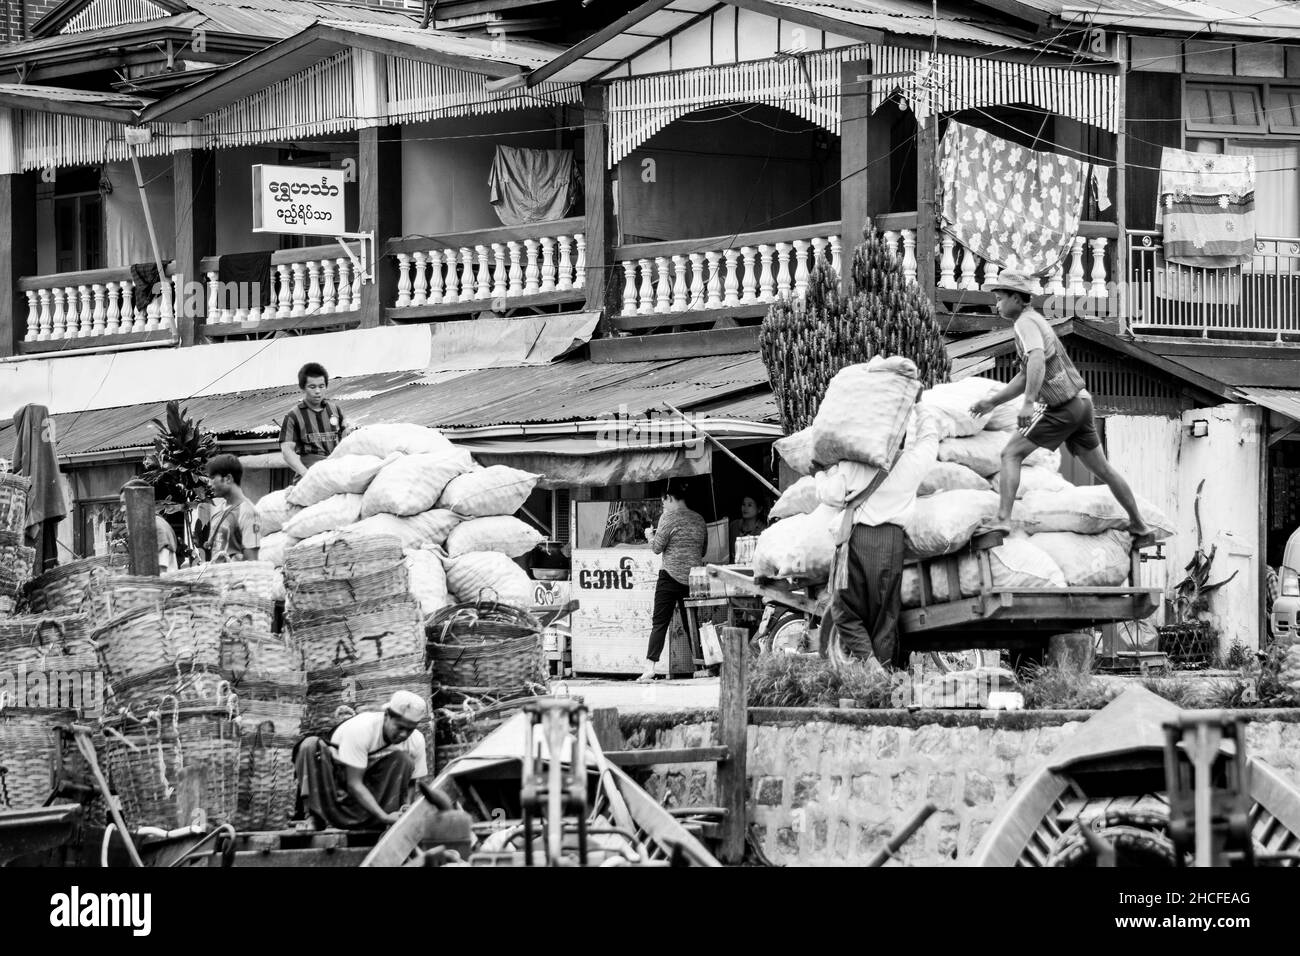 Burmese men loading and unloading sacks of supplies and food from boats to carts, in Inle Lake Stock Photo